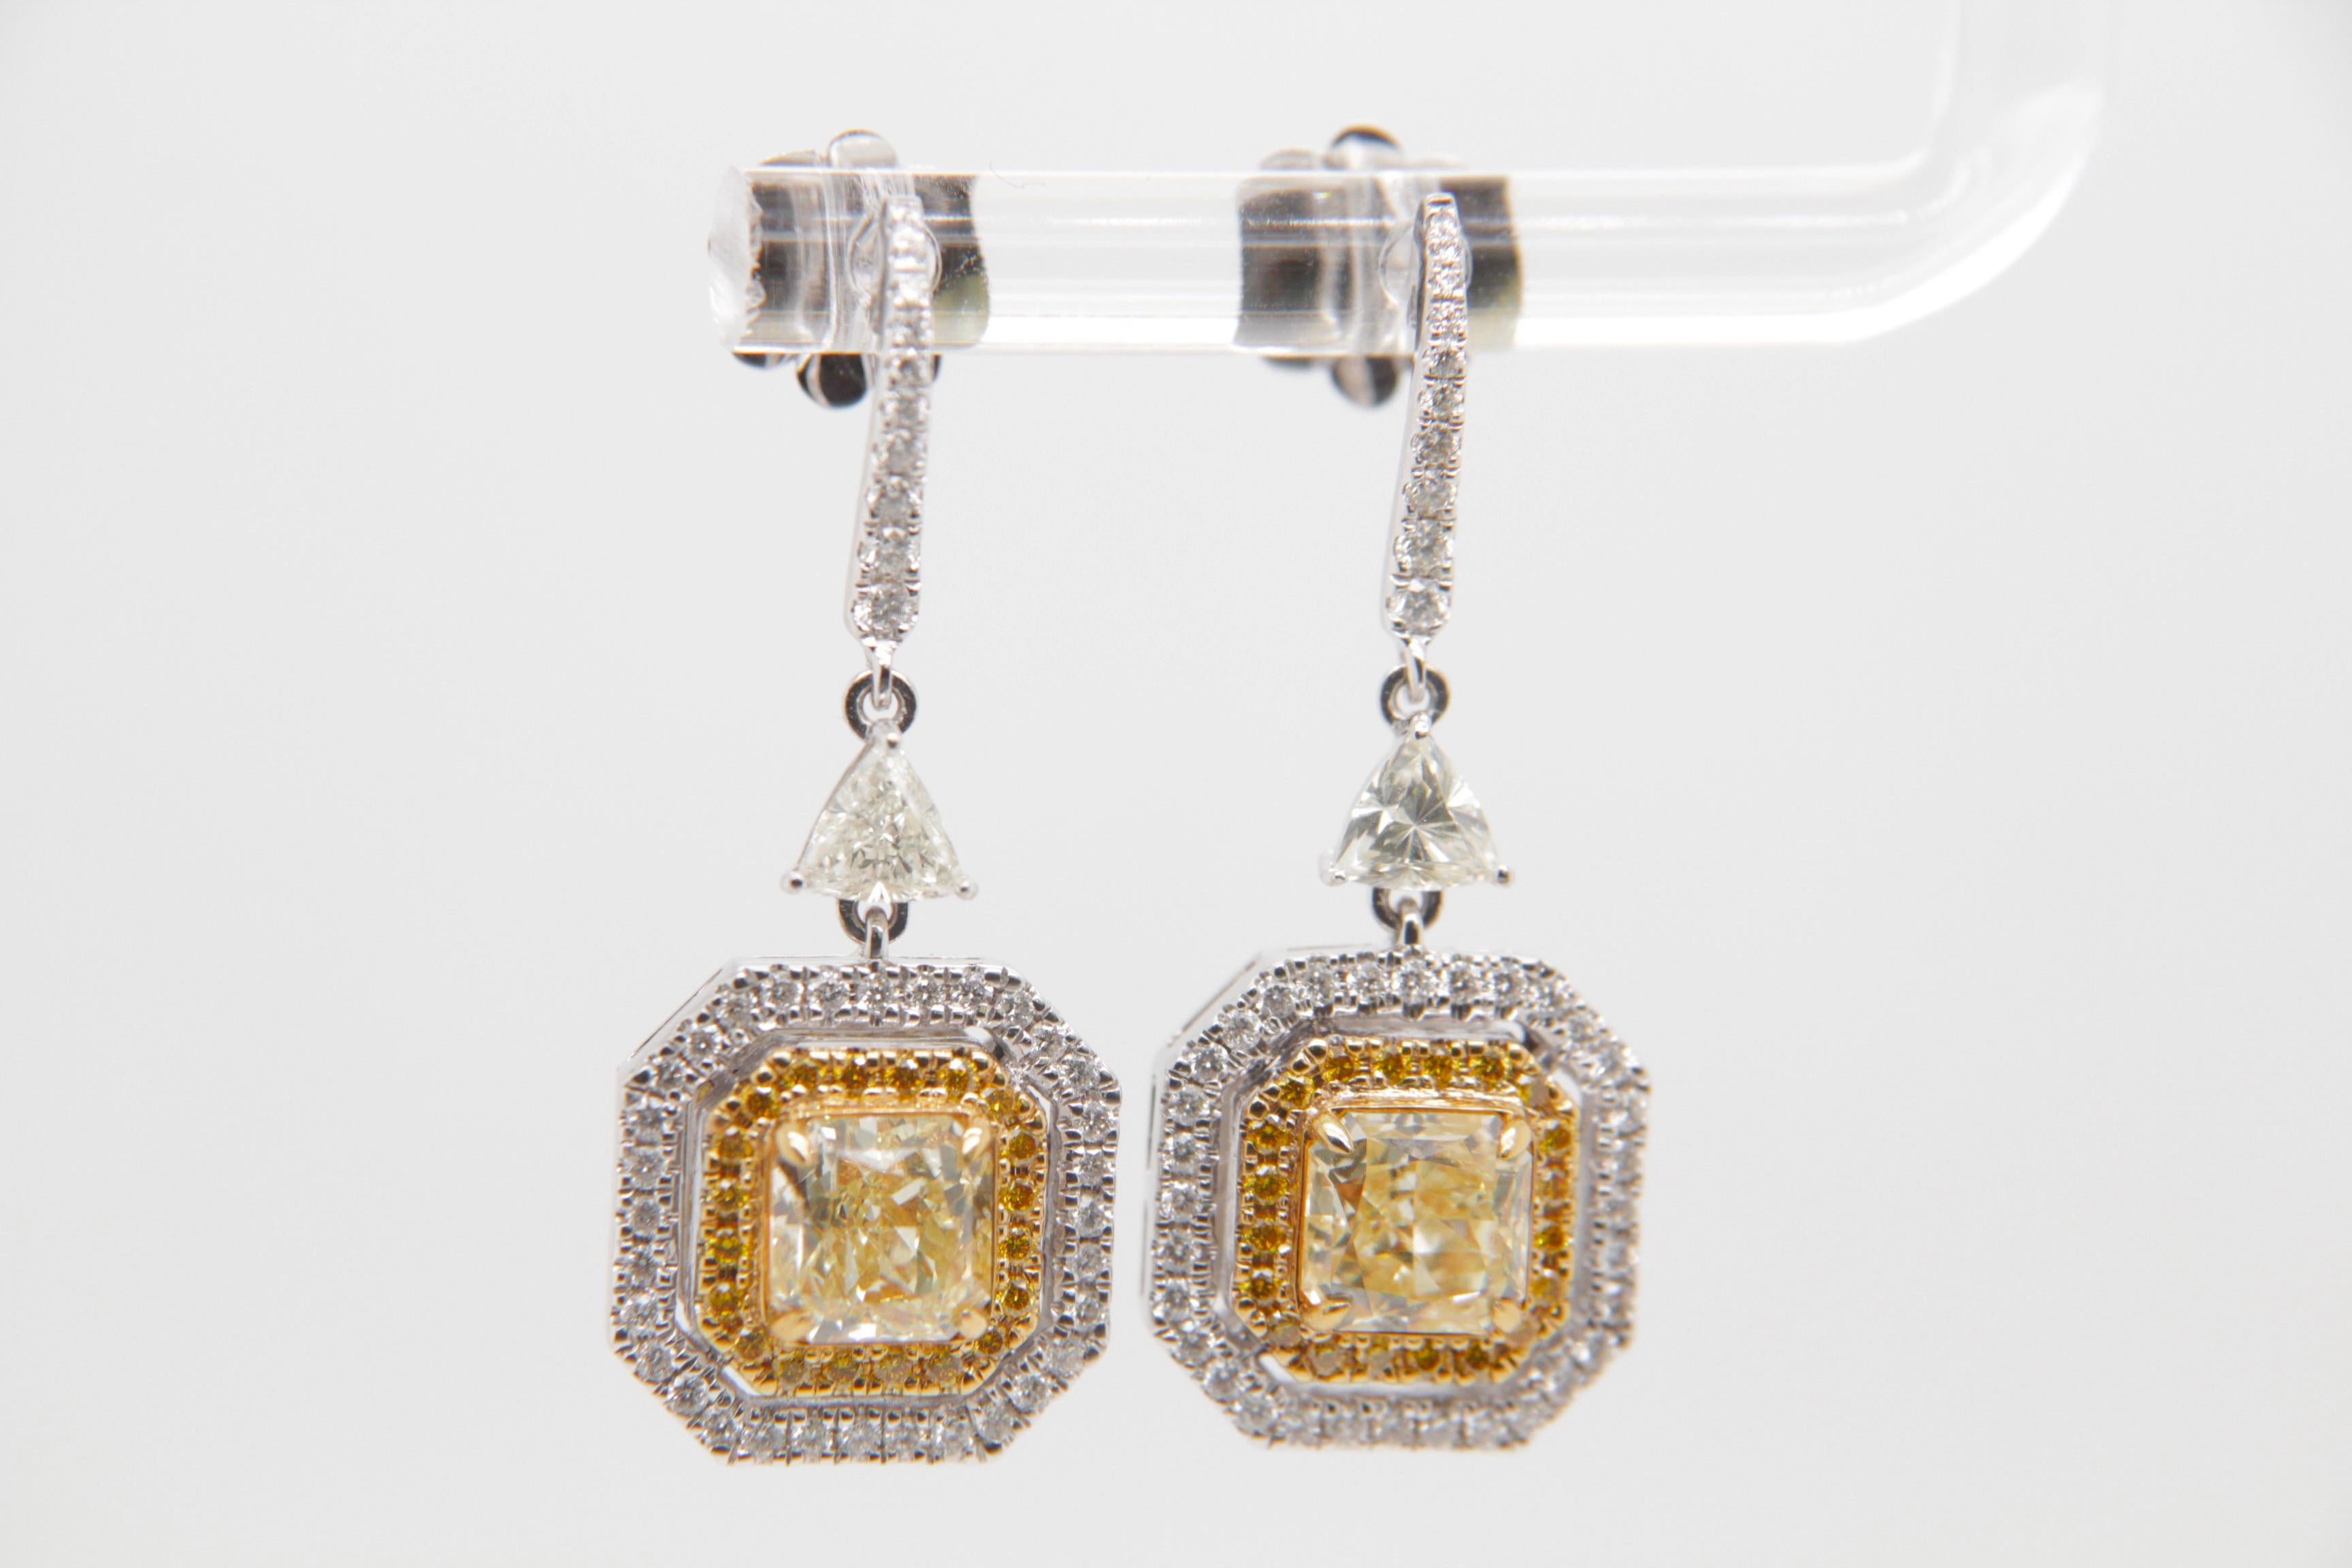 Introducing a captivating creation from Rewa Jewelry, these diamond earrings are a mesmerizing expression of timeless elegance and refined craftsmanship.

At the heart of these earrings are two radiant diamonds, totaling 2.53 carats. Each diamond,